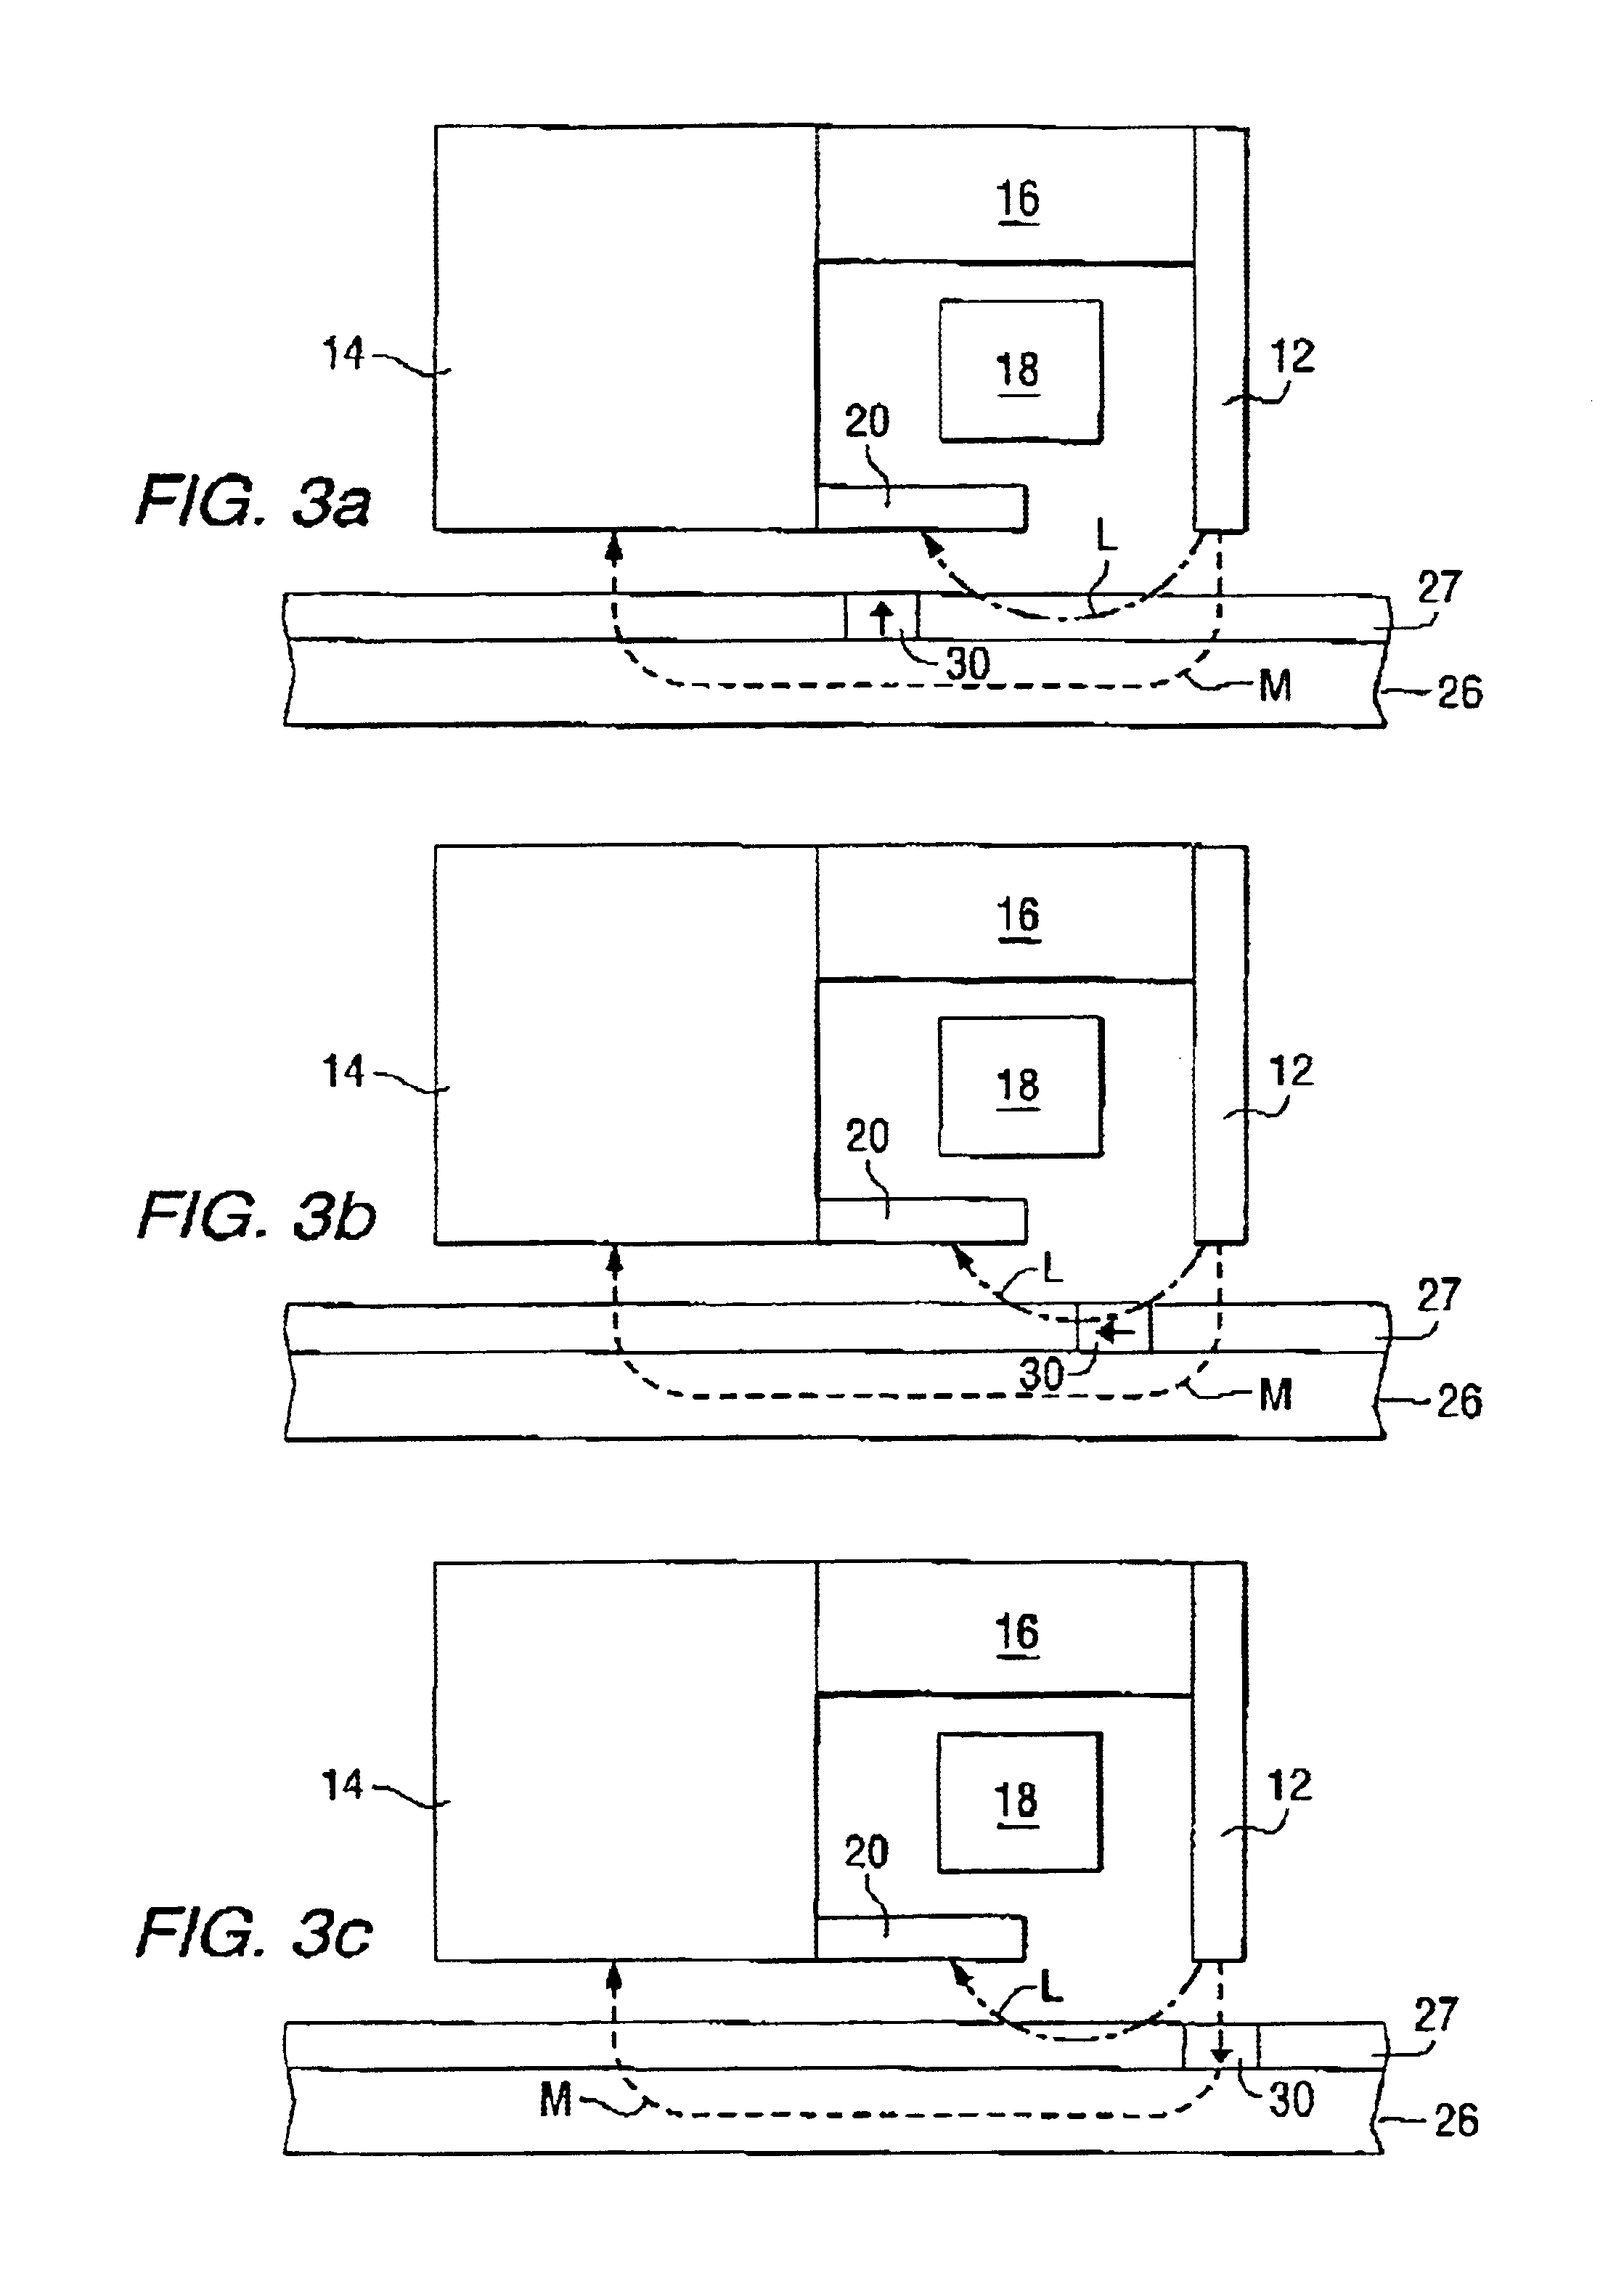 Perpendicular magnetic recording head with longitudinal magnetic field generator to facilitate magnetization switching